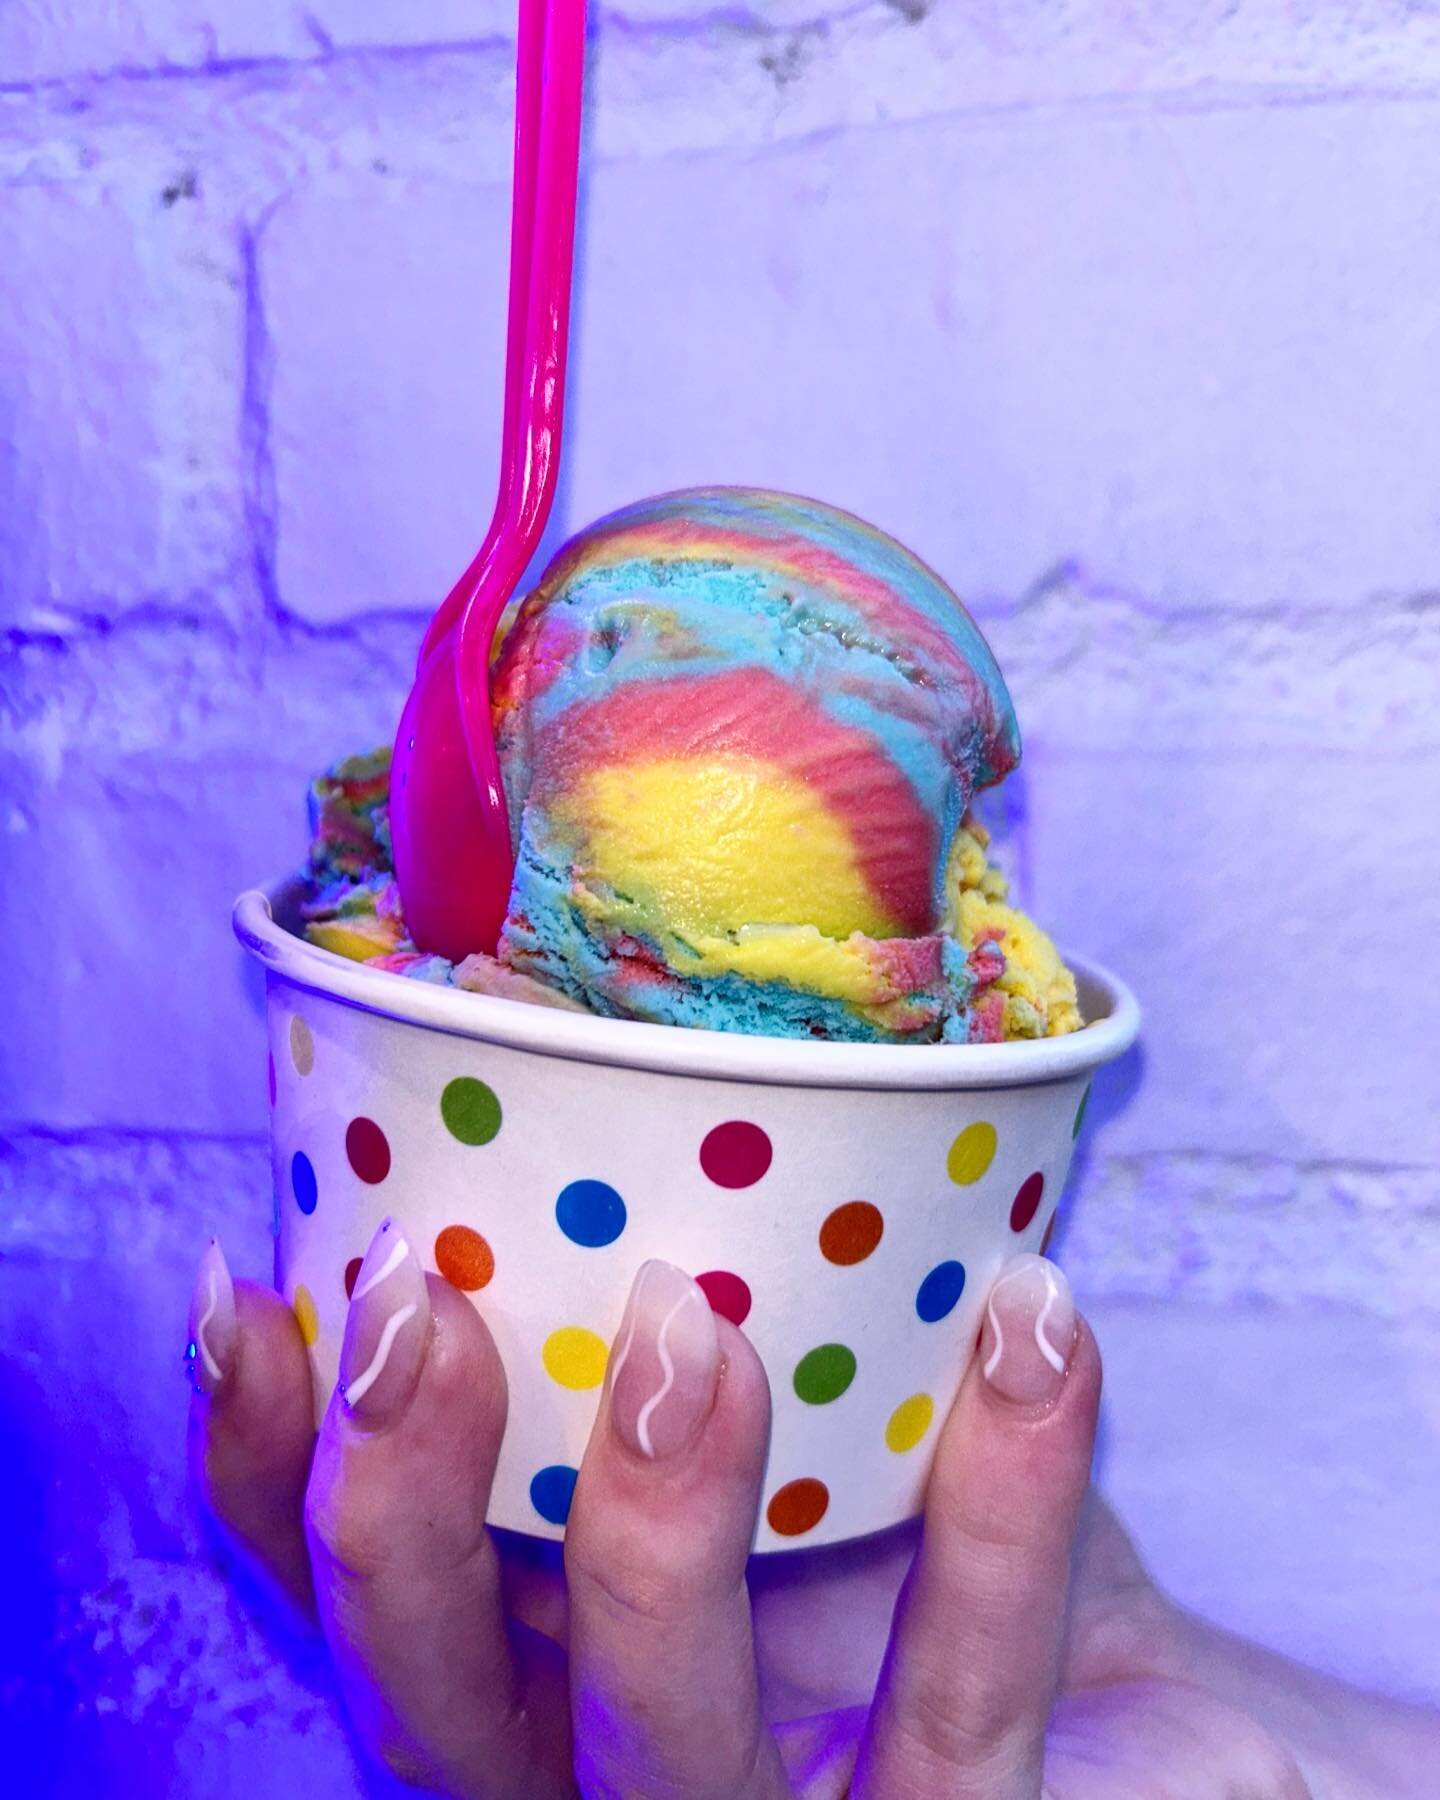 Introducing Super Scoop!
Swirls of vanilla ice cream that&rsquo;s dyed yellow, blue and pink😍
(Available in our wantagh location only)